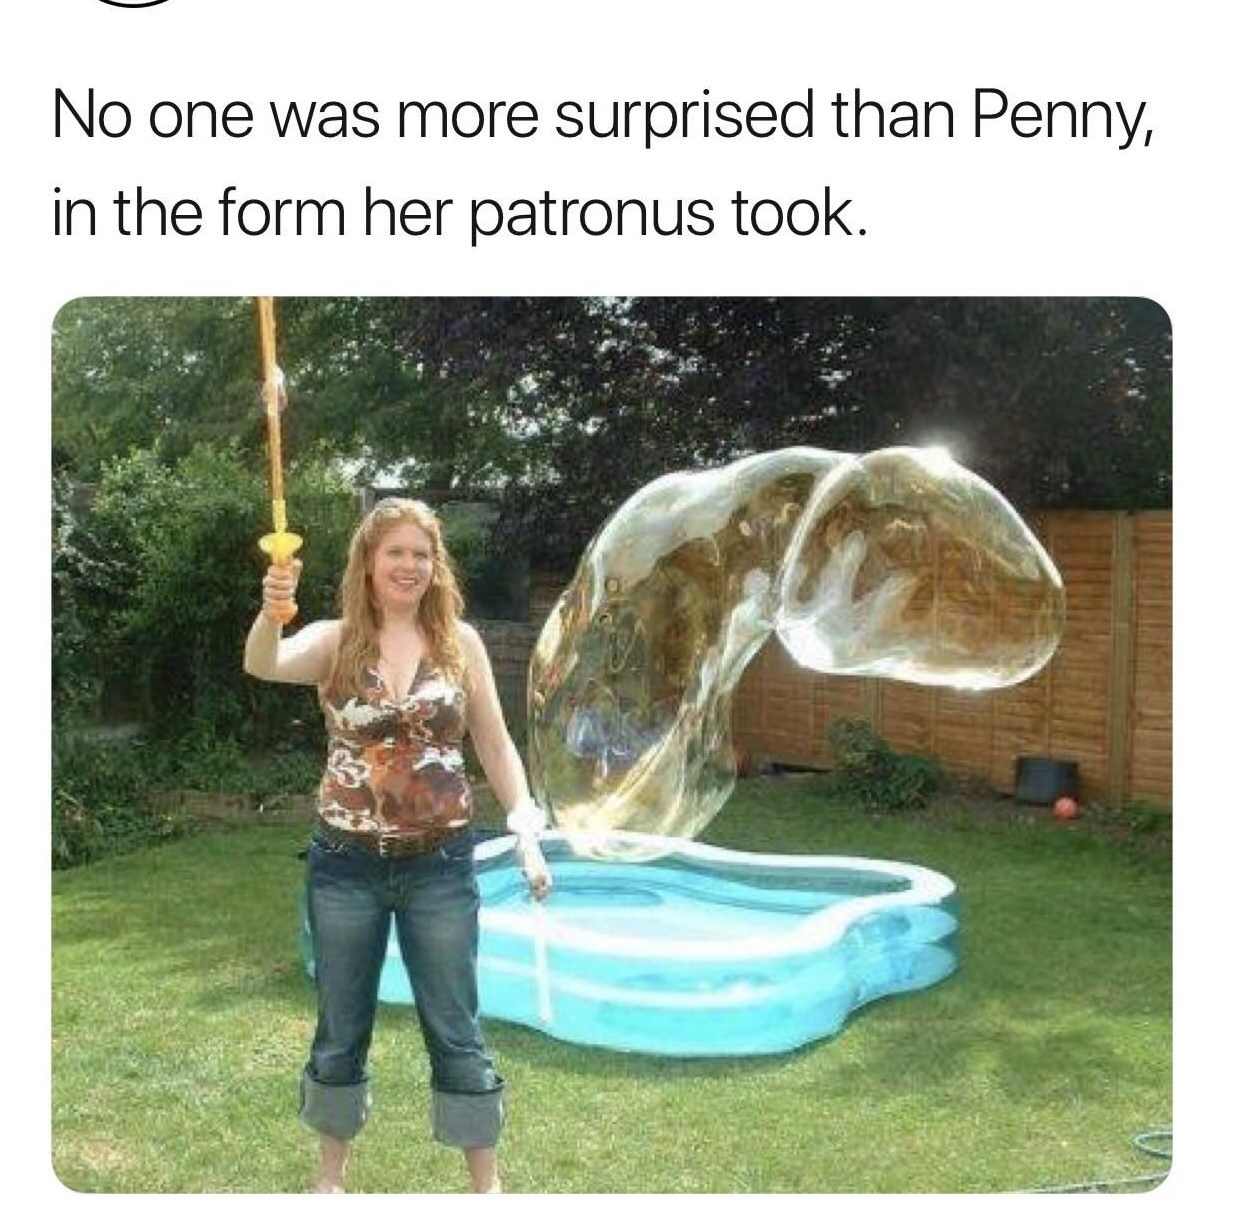 patronus dick - No one was more surprised than Penny, in the form her patronus took.